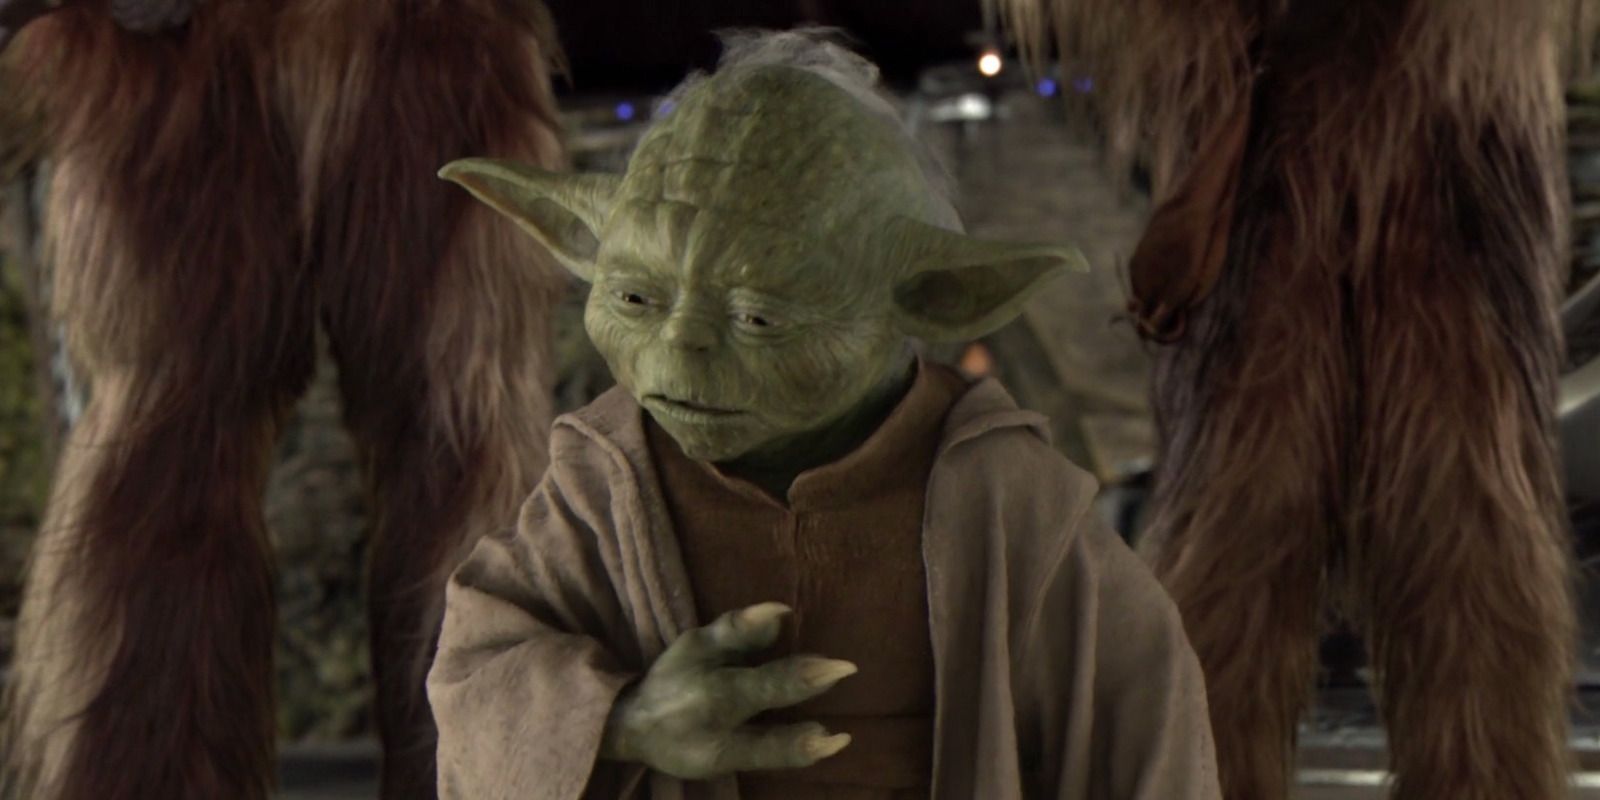 Yoda reacting to Great Jedi Purge Order 66 in Star Wars Revenge of the Sith